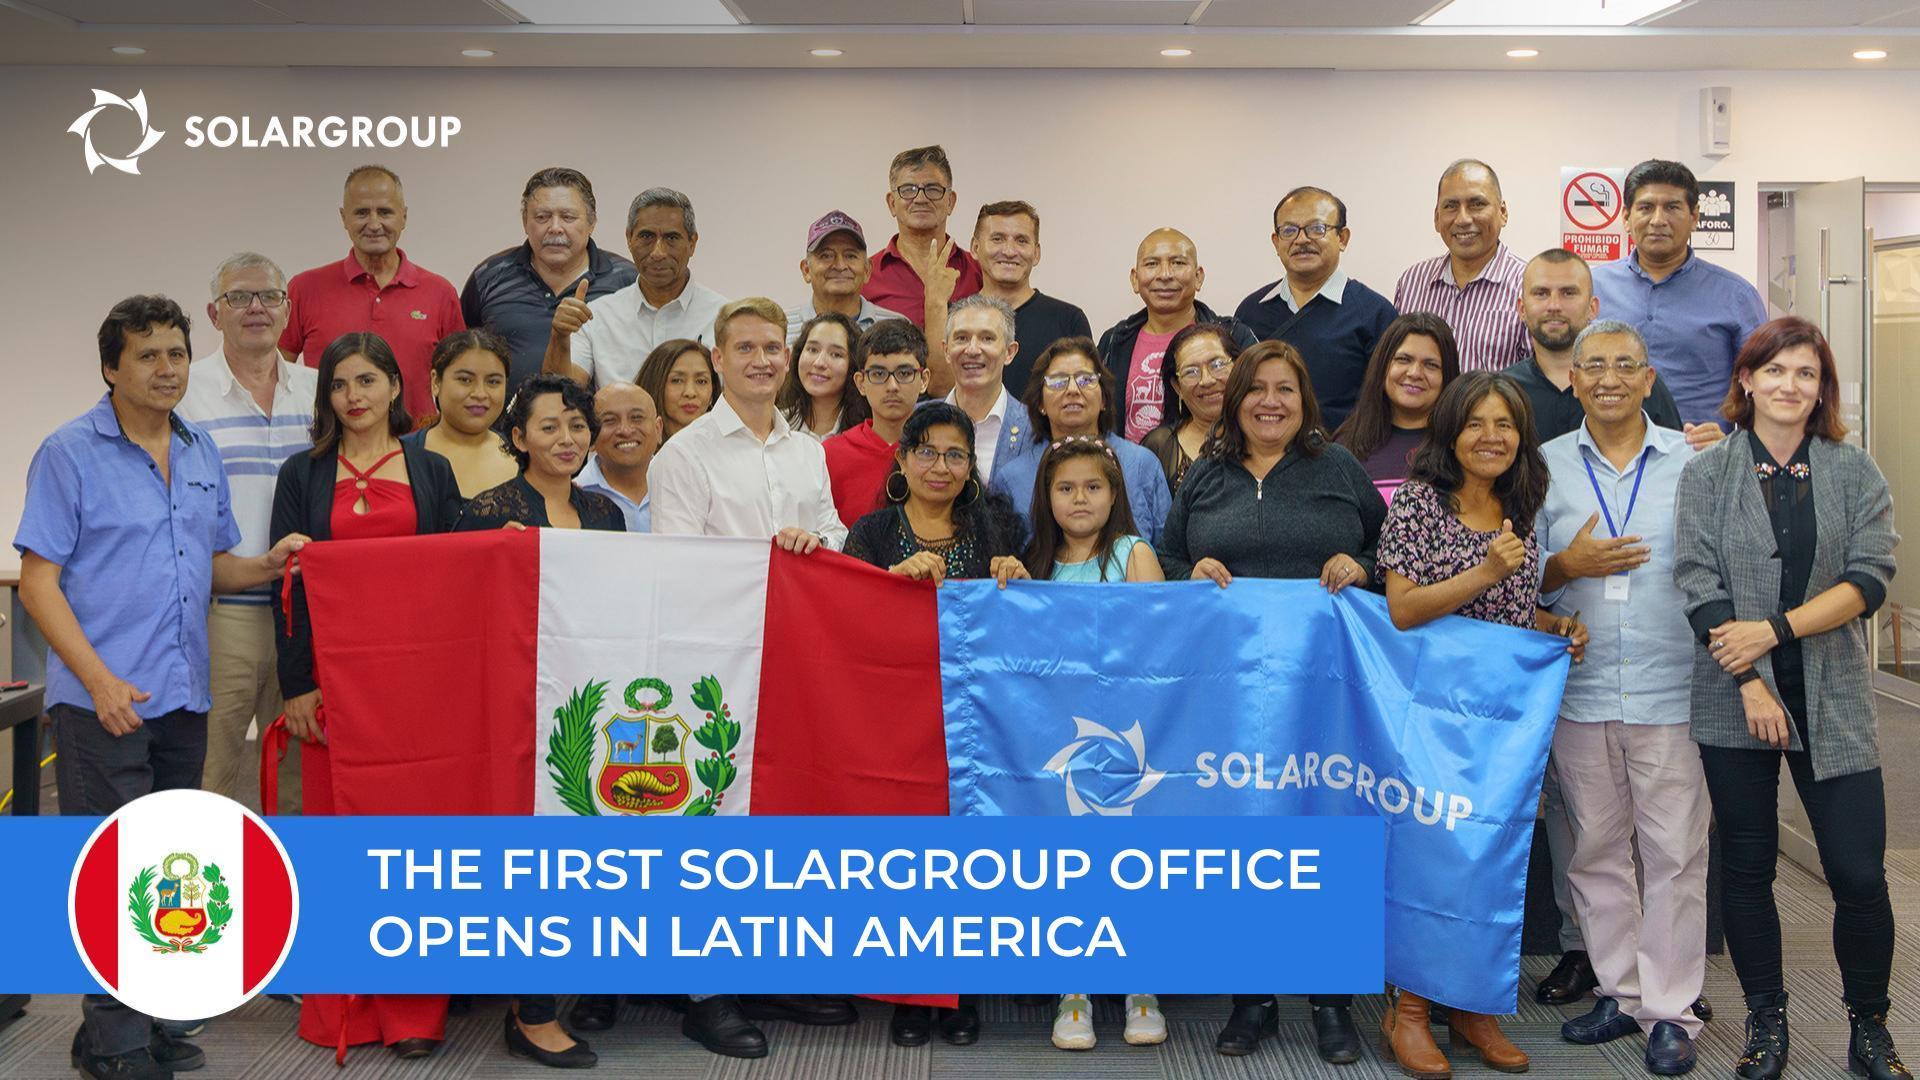 A new step for developing the project in Latin America: SOLARGROUP opens its office in Peru